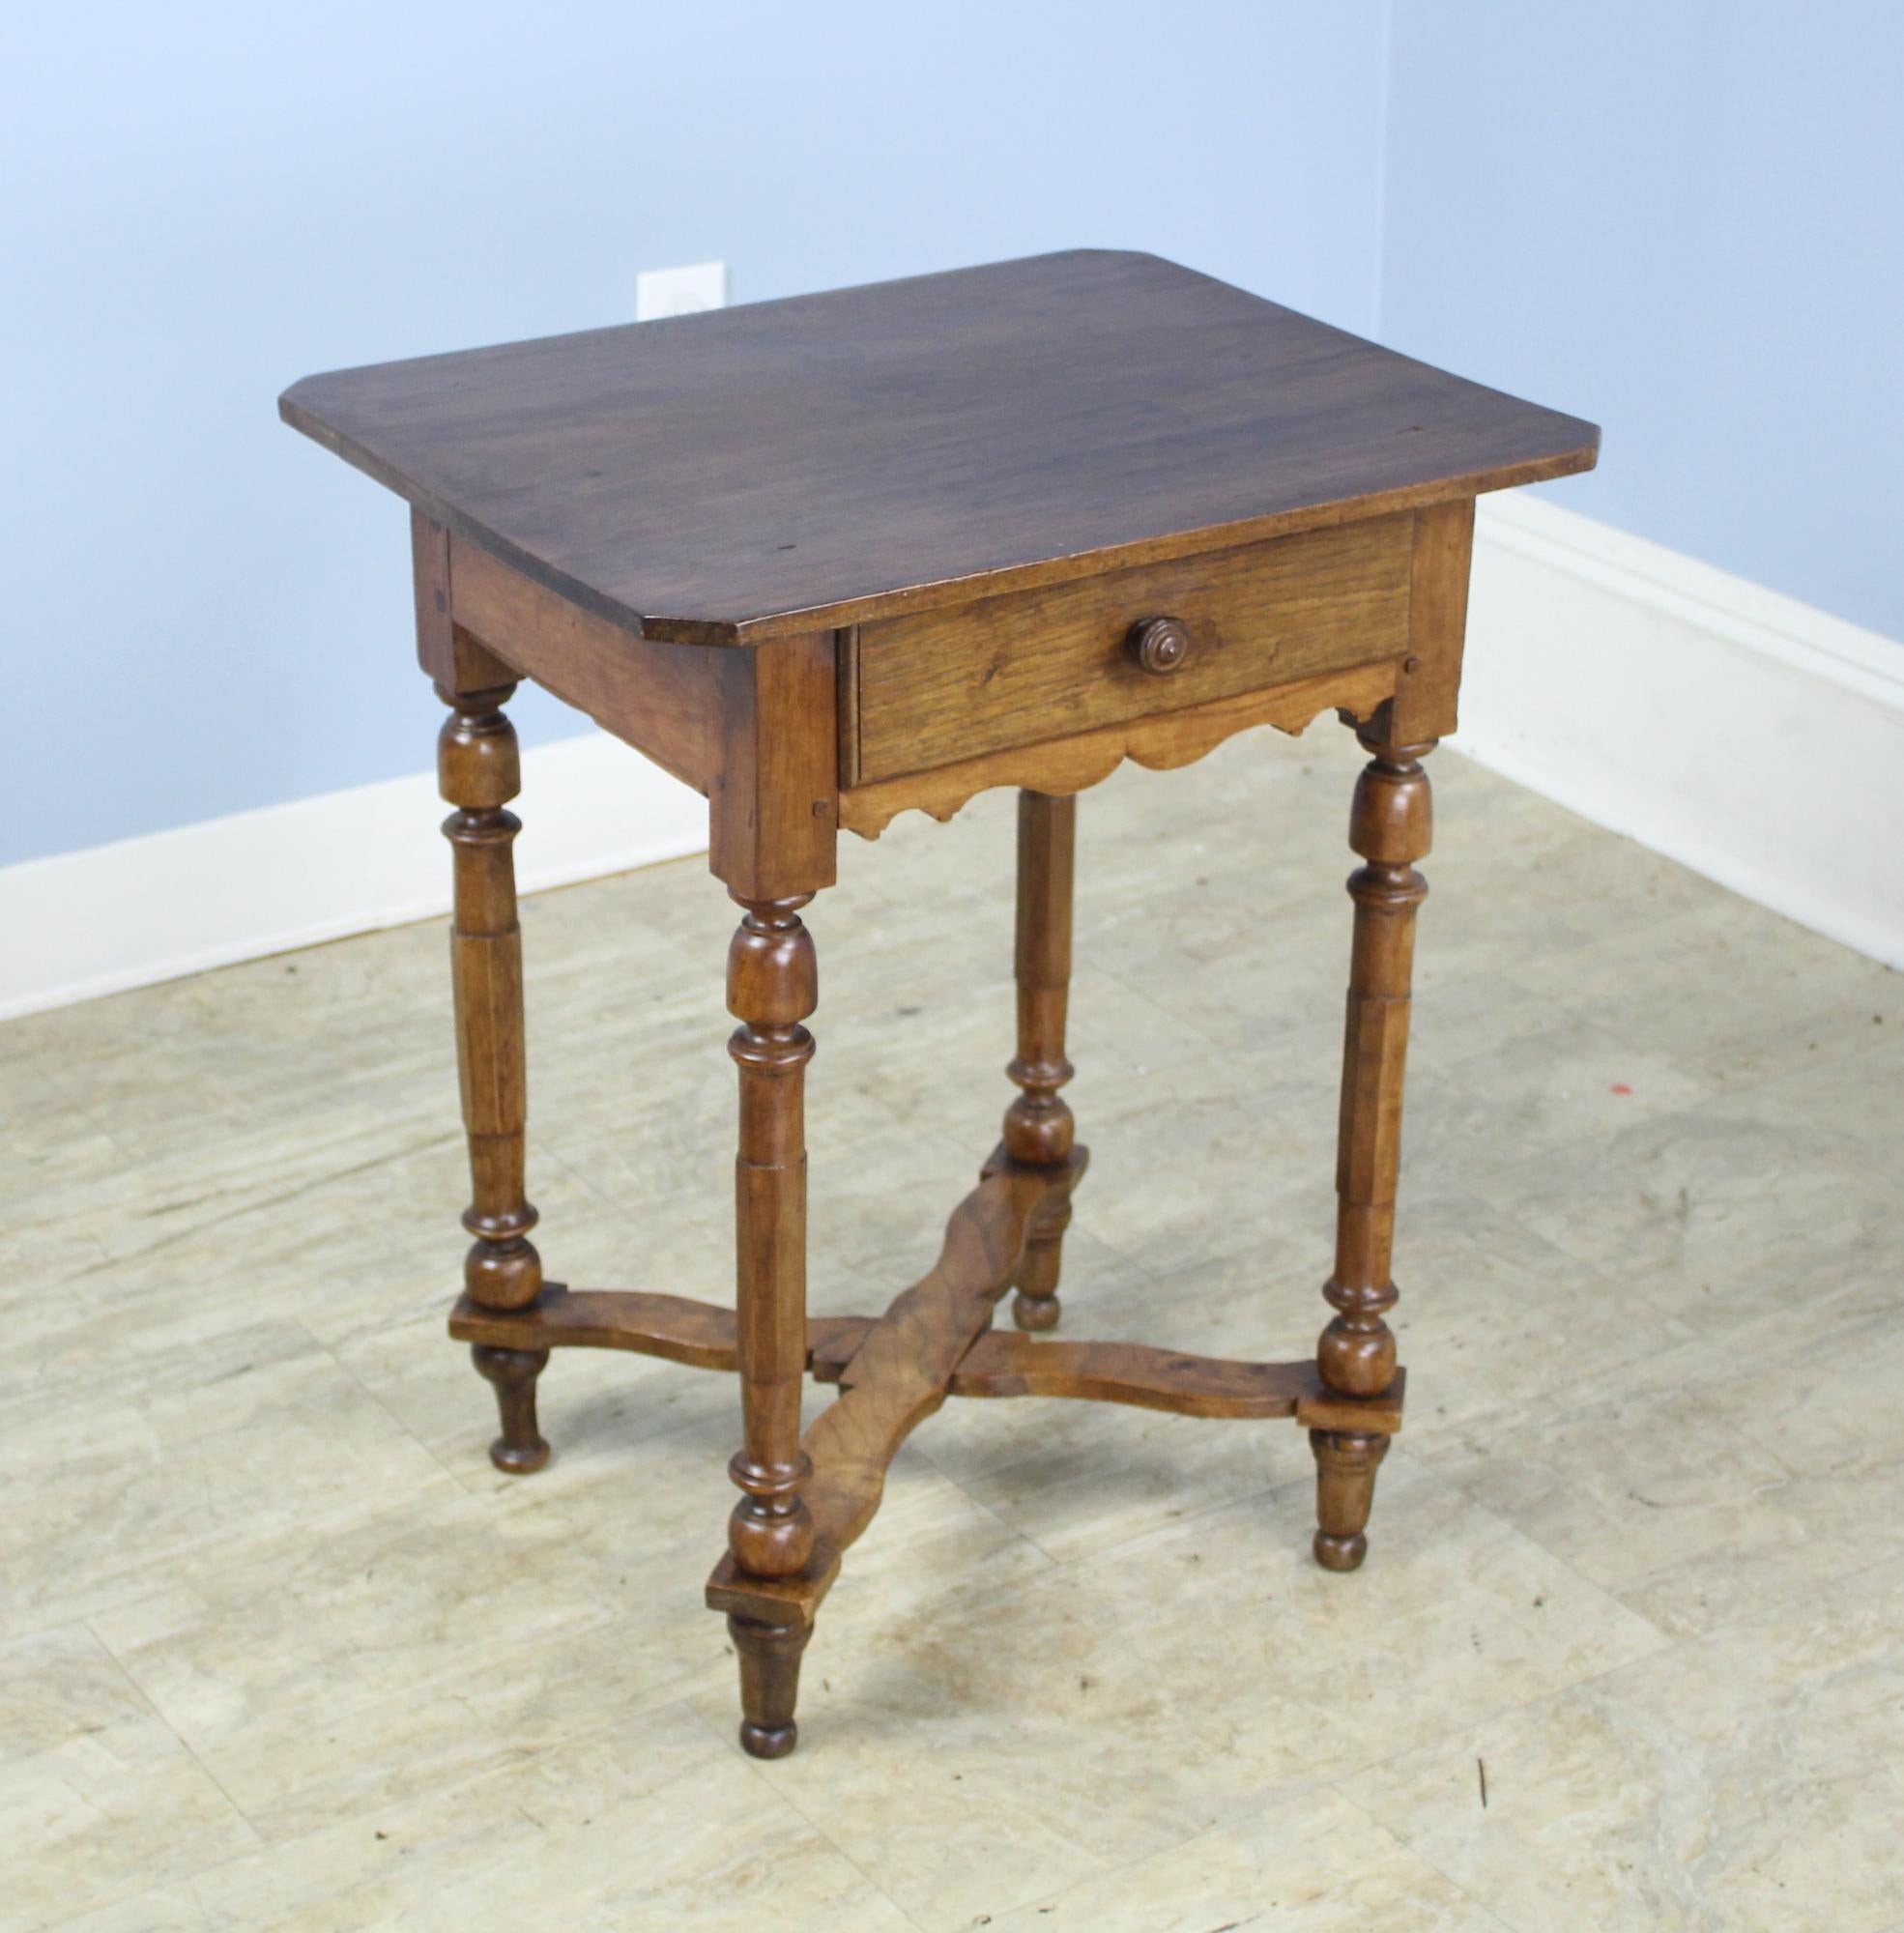 A splendid walnut side table with a single drawer and graceful turned legs. Charming shaped apron. Wonderful walnut grain and color and good patina. The shaped stretchers adds a note of whimsy.  Back leg has been replaced as is slightly different as